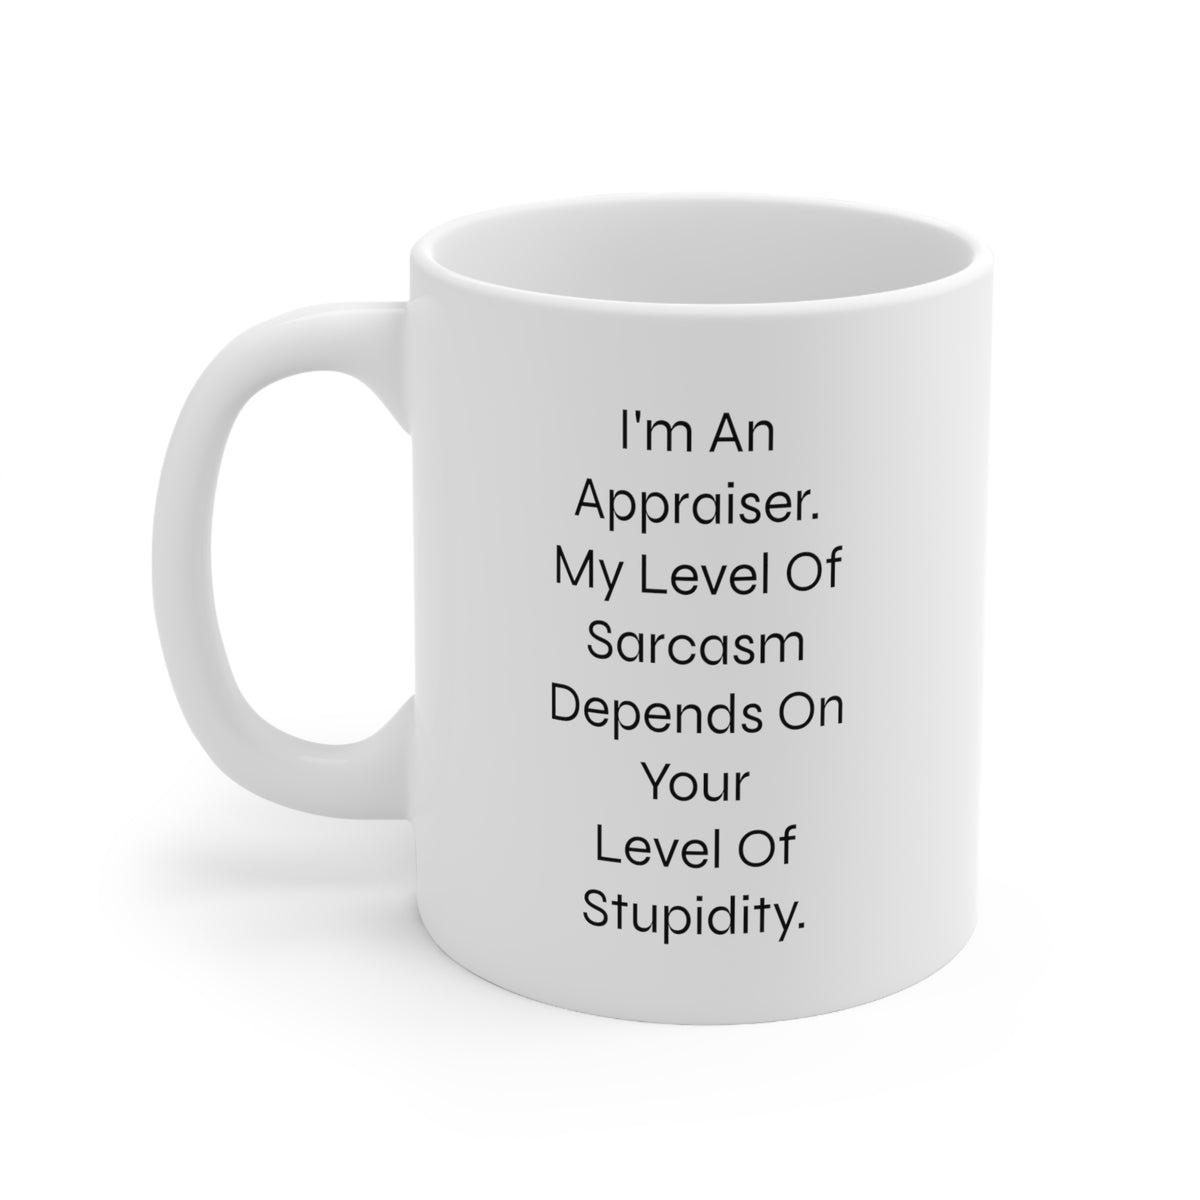 I'm An Appraiser. My Level Of Sarcasm Depends On Your Level Of Stupidity. - Funny Appraiser 11oz Coffee Mug - Best Inspirational Gifts For Men And Wo